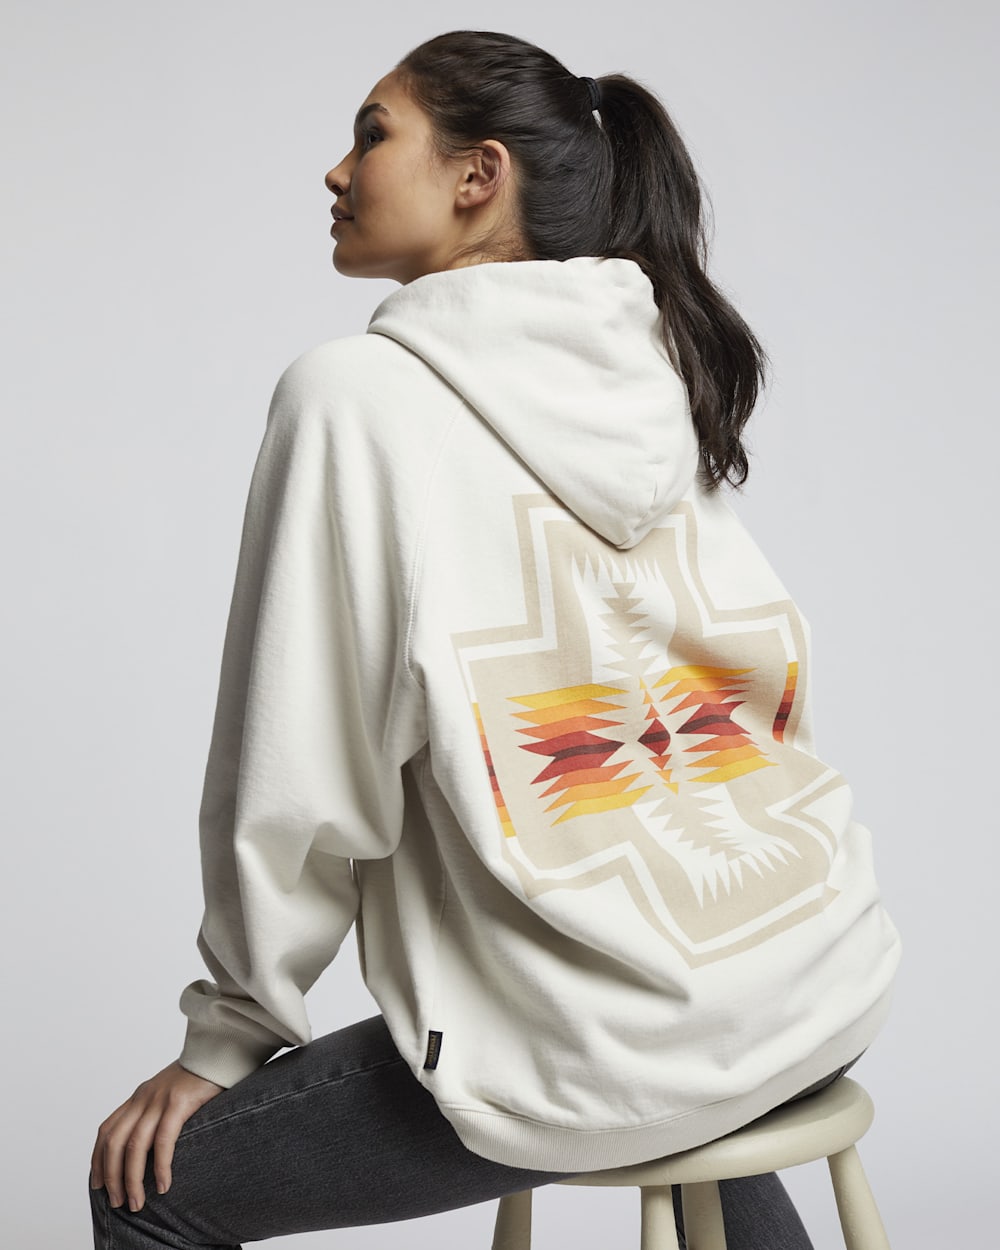 ALTERNATE VIEW OF LIMITED EDITION HOODIE IN IVORY HARDING image number 4